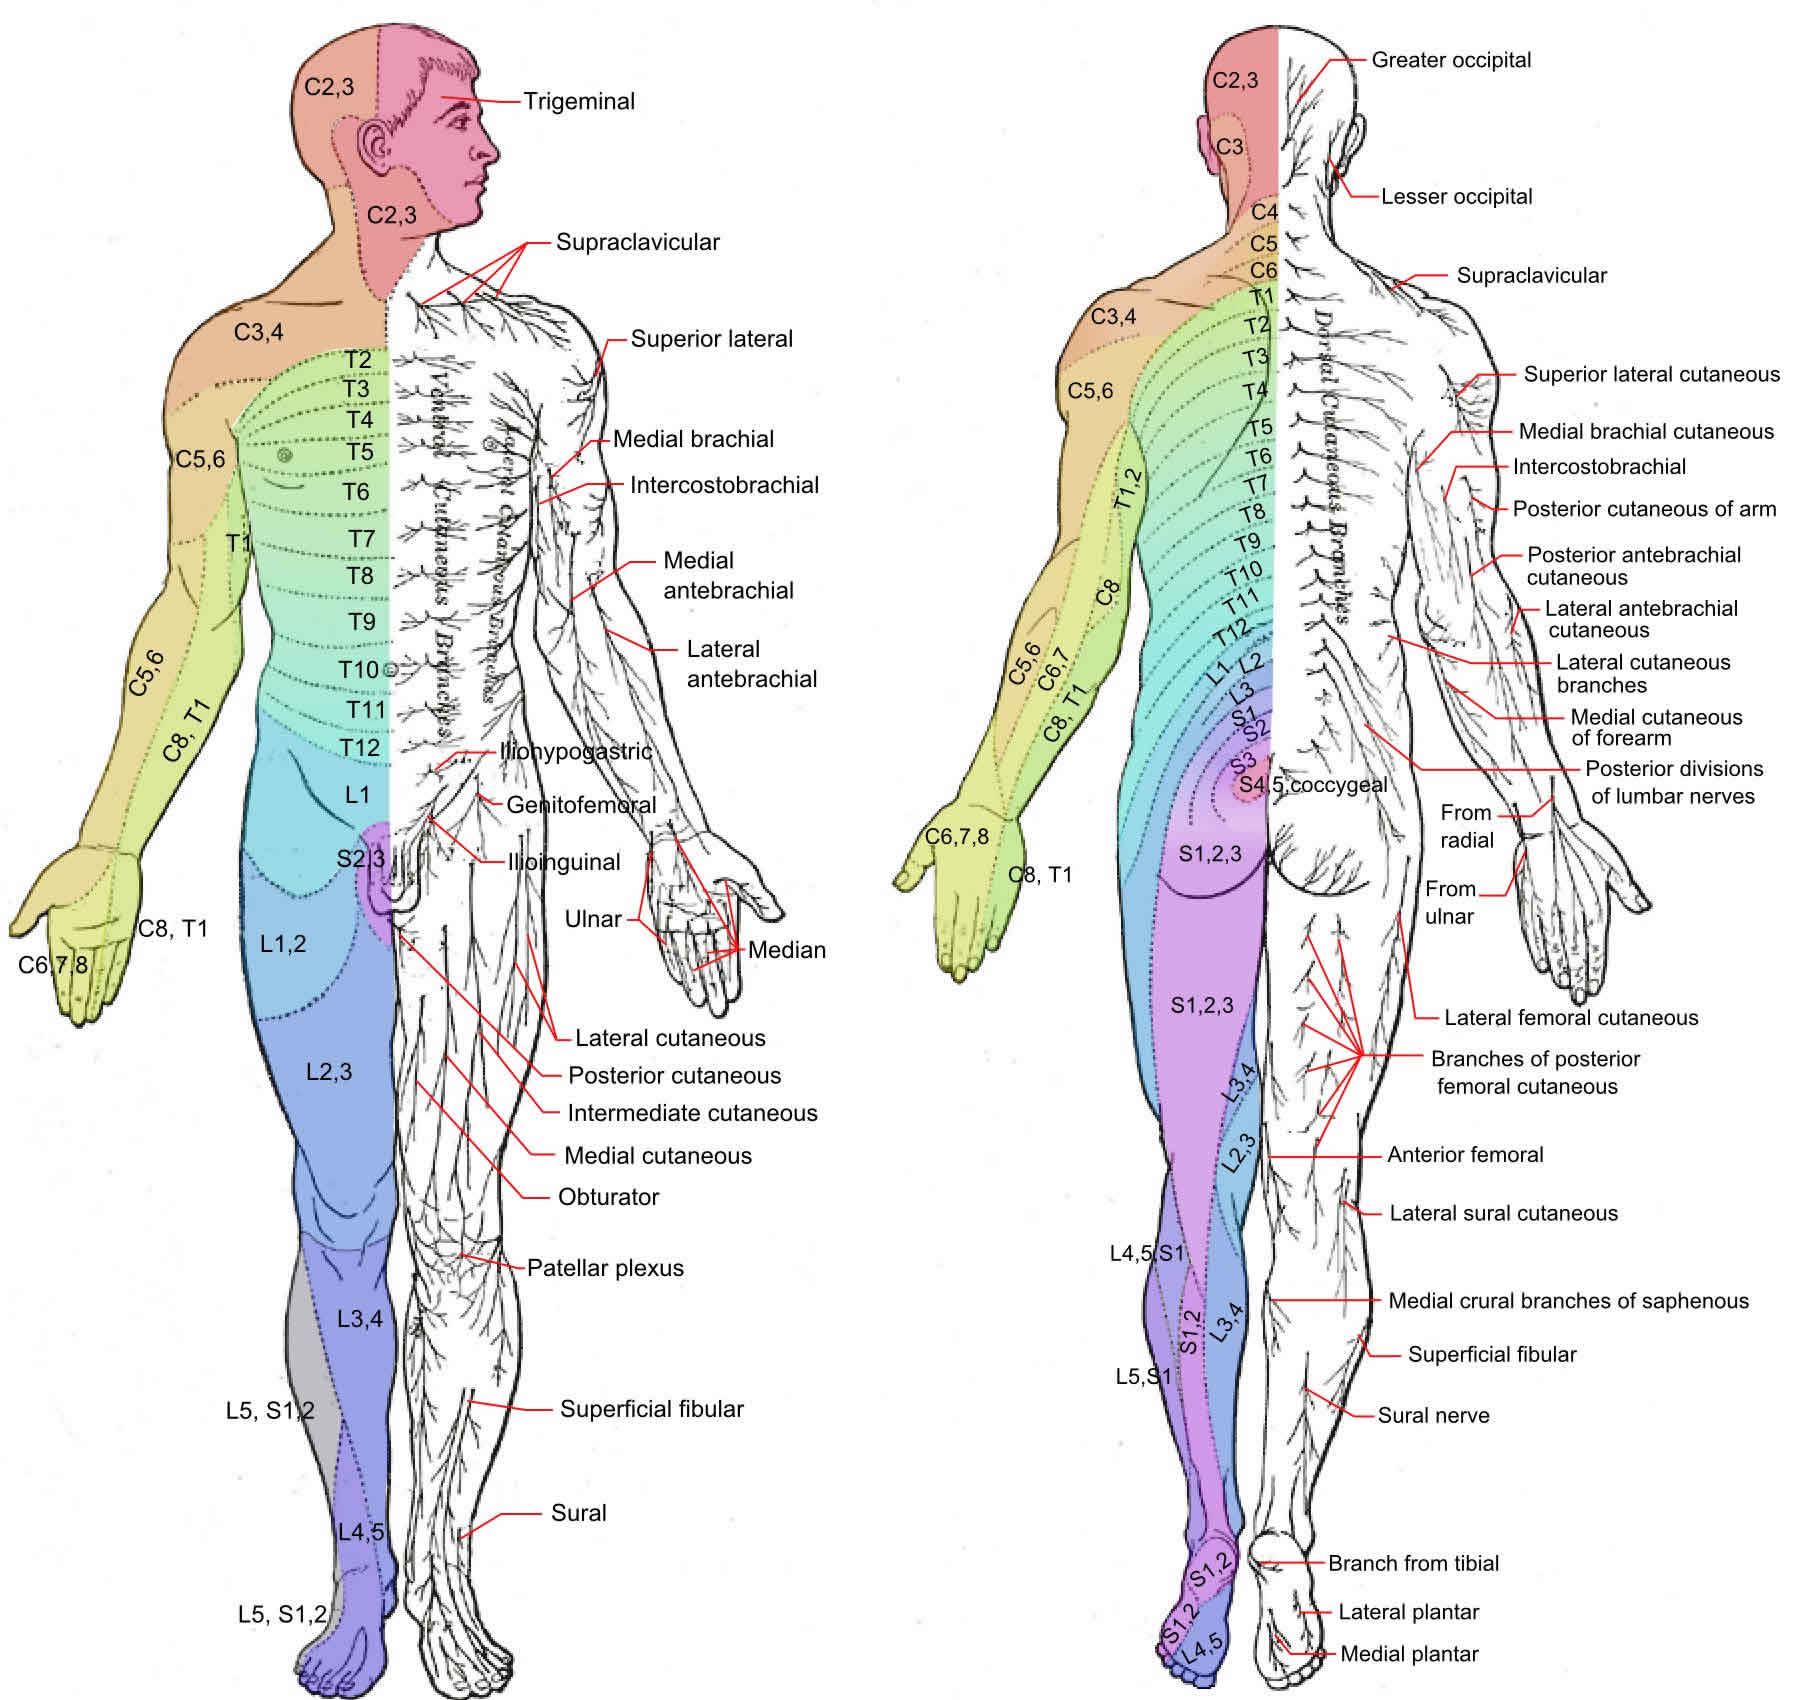 Dermatomes Definition Dermatome Levels And Clinical Significance